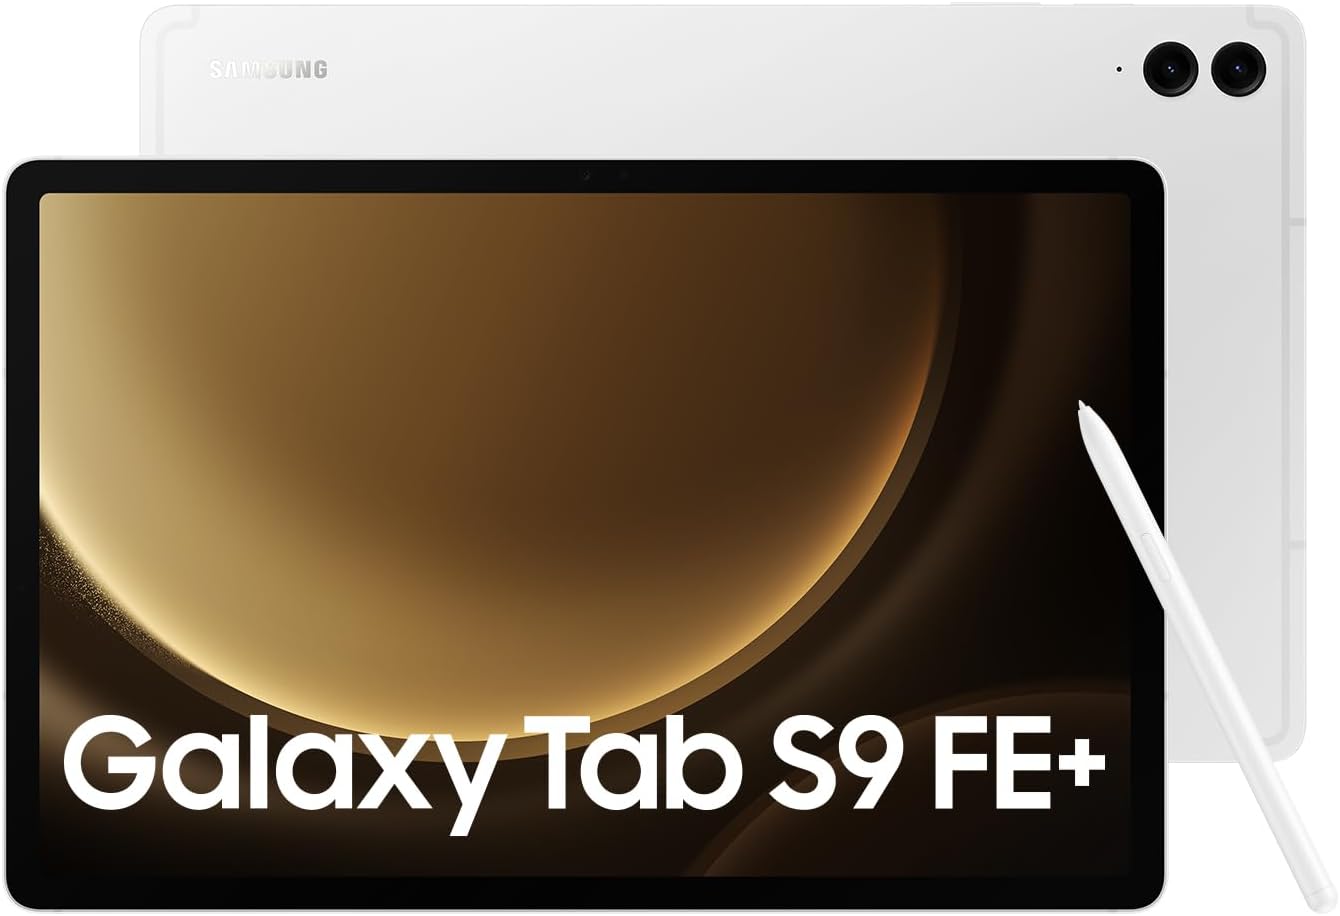 Samsung Galaxy Tab S9 FE+ 12.4 5G Tablet, Silver - Colorful design for creative possibilities and entertainment. 8806095170695